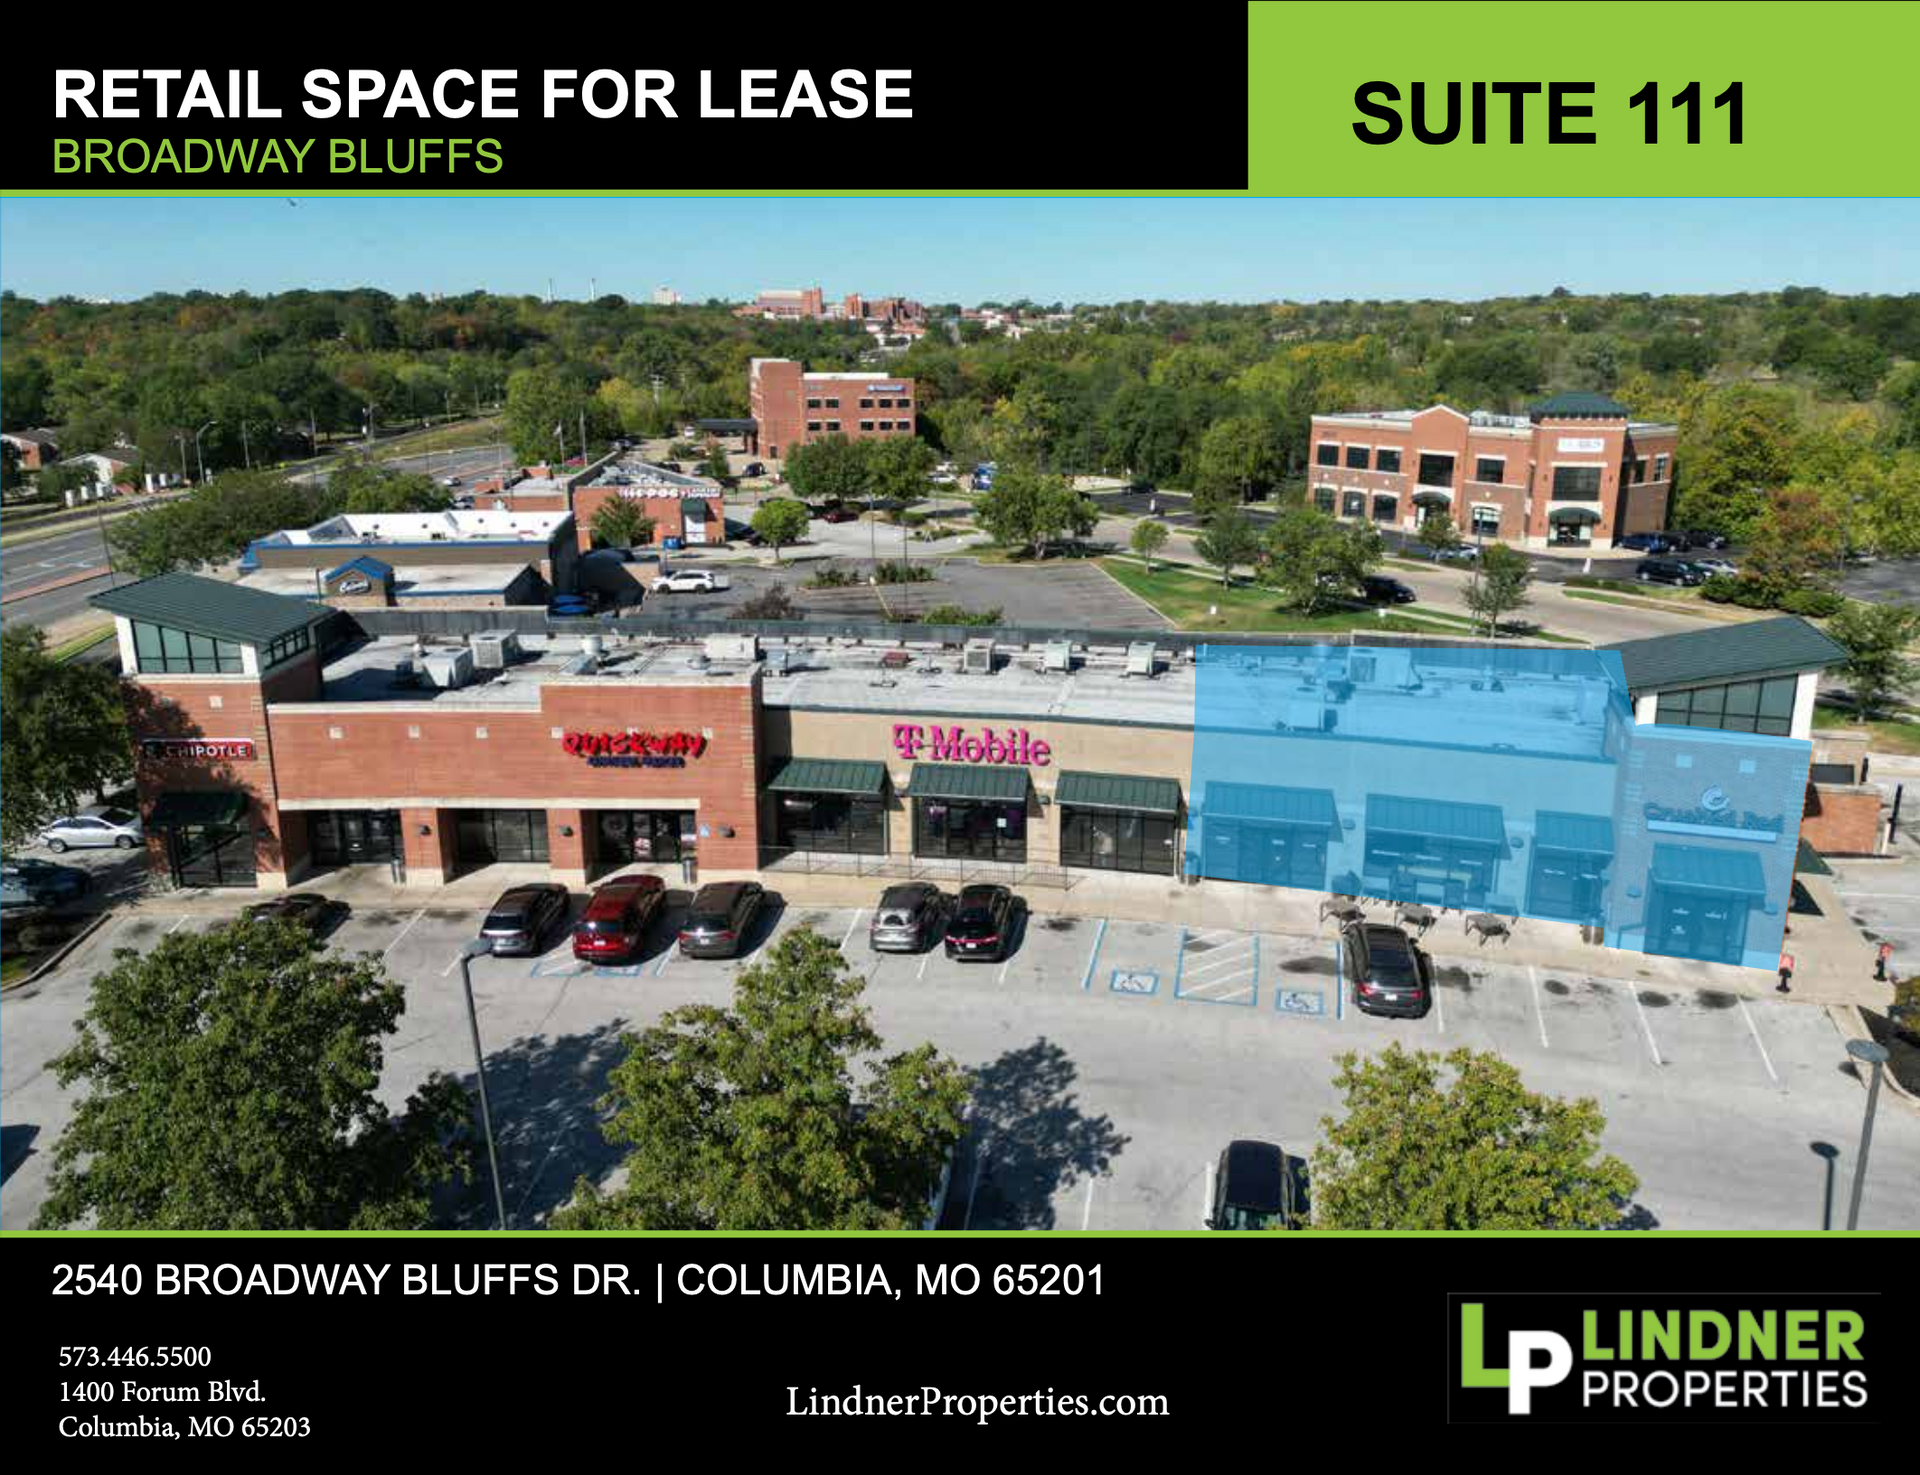 Broadway Bluffs Suite 111 From Lindner Properties in Columbia, MO.